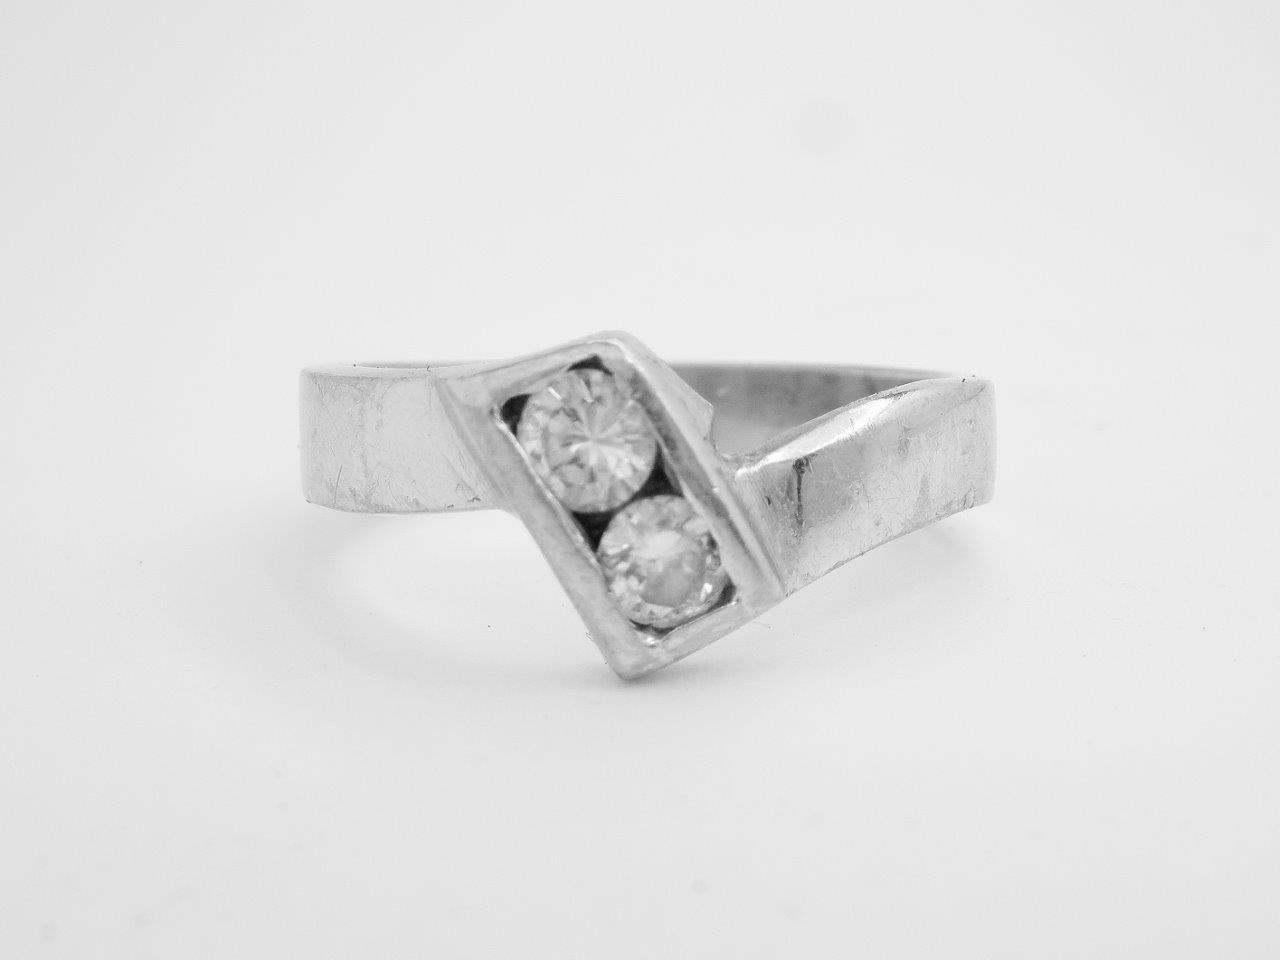 A 2 stone round brilliant cut diamond wedding ring to fit a single stone Princess cut cross-over engagement ring. Single stone princess cut diamond cross-over engagement ring. Very chunky & no finesse.